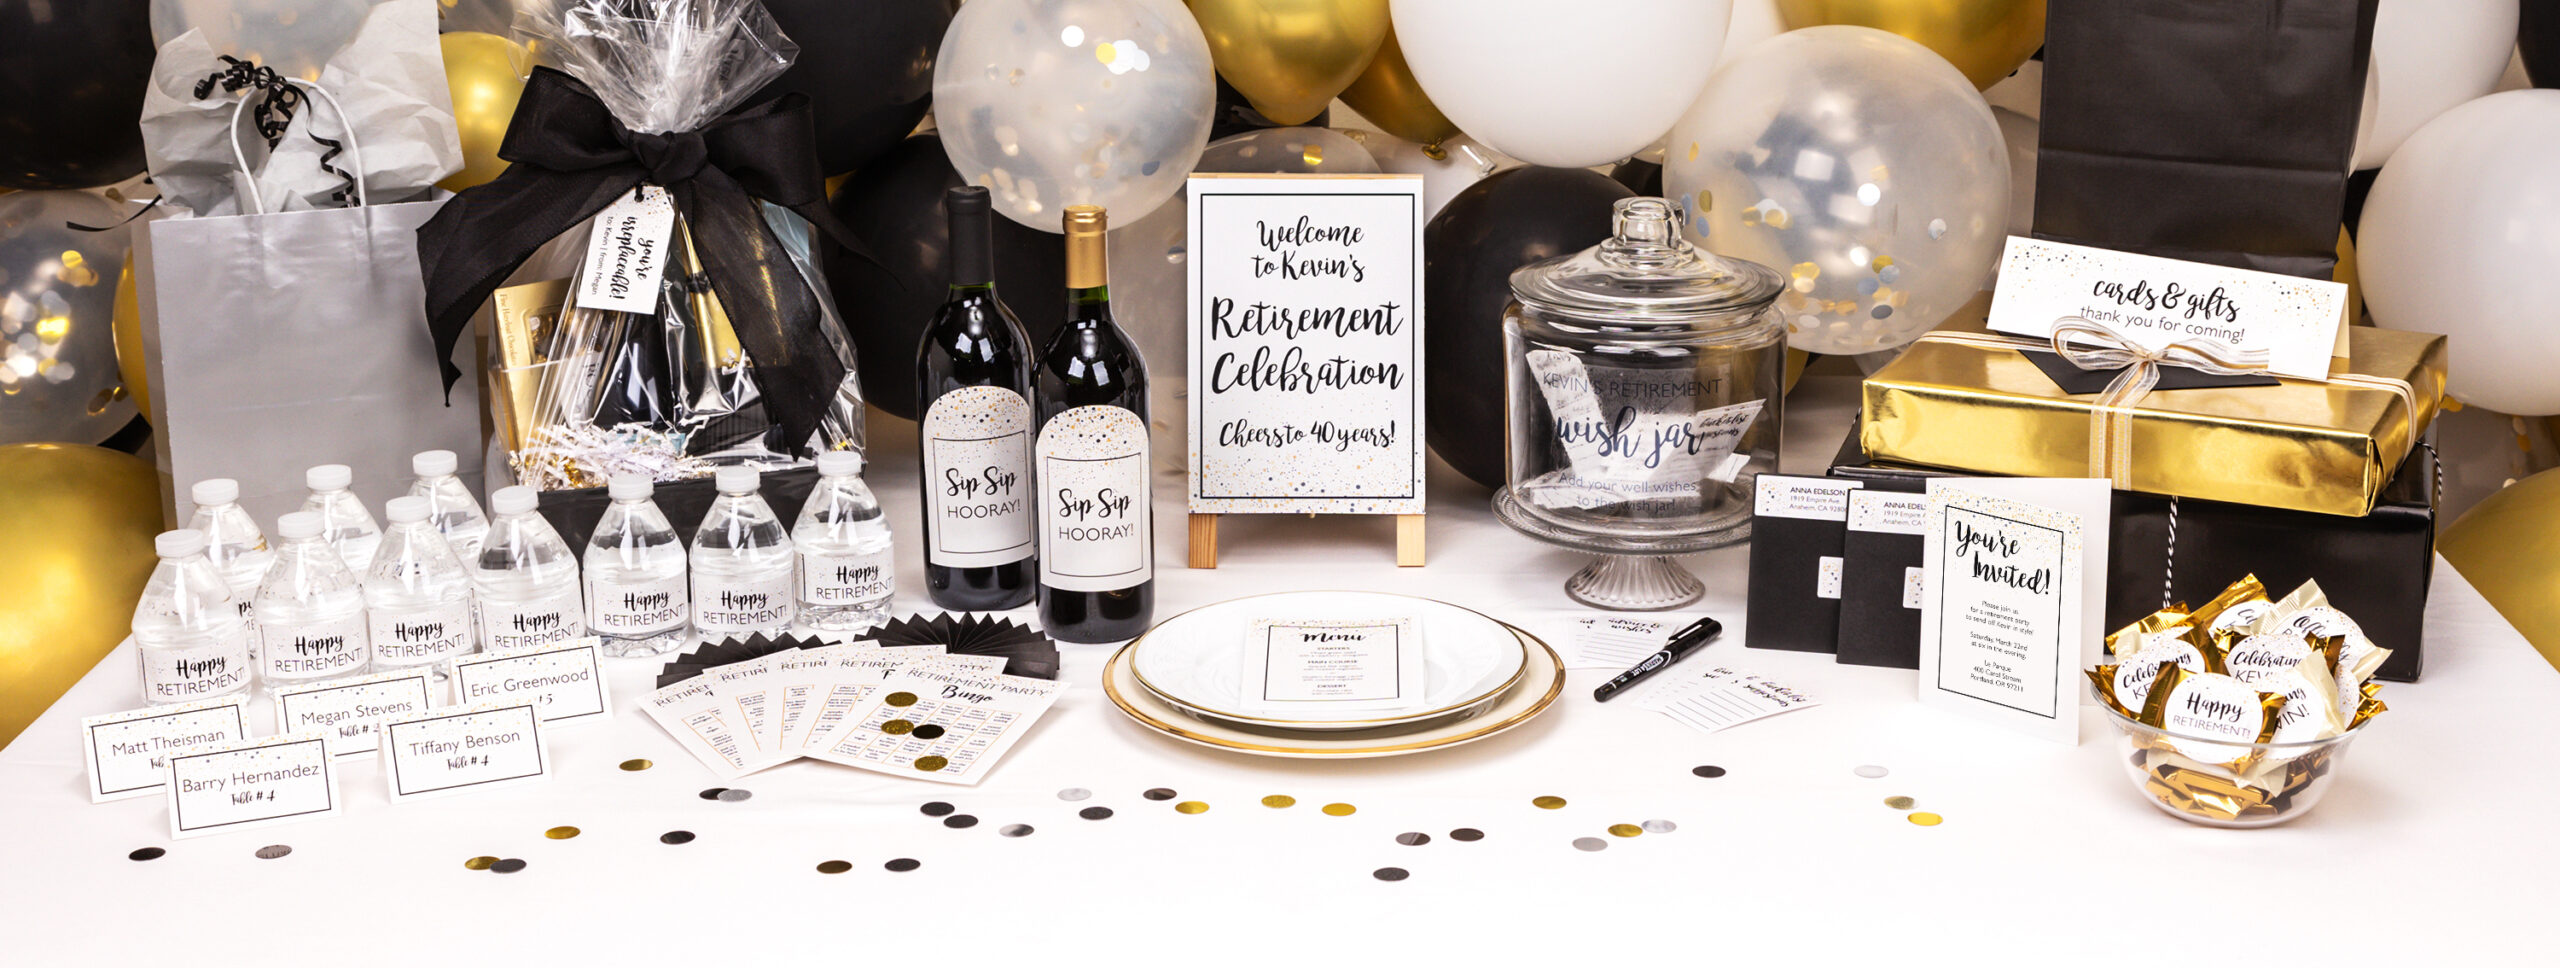 10 Retirement Party Ideas For The Best